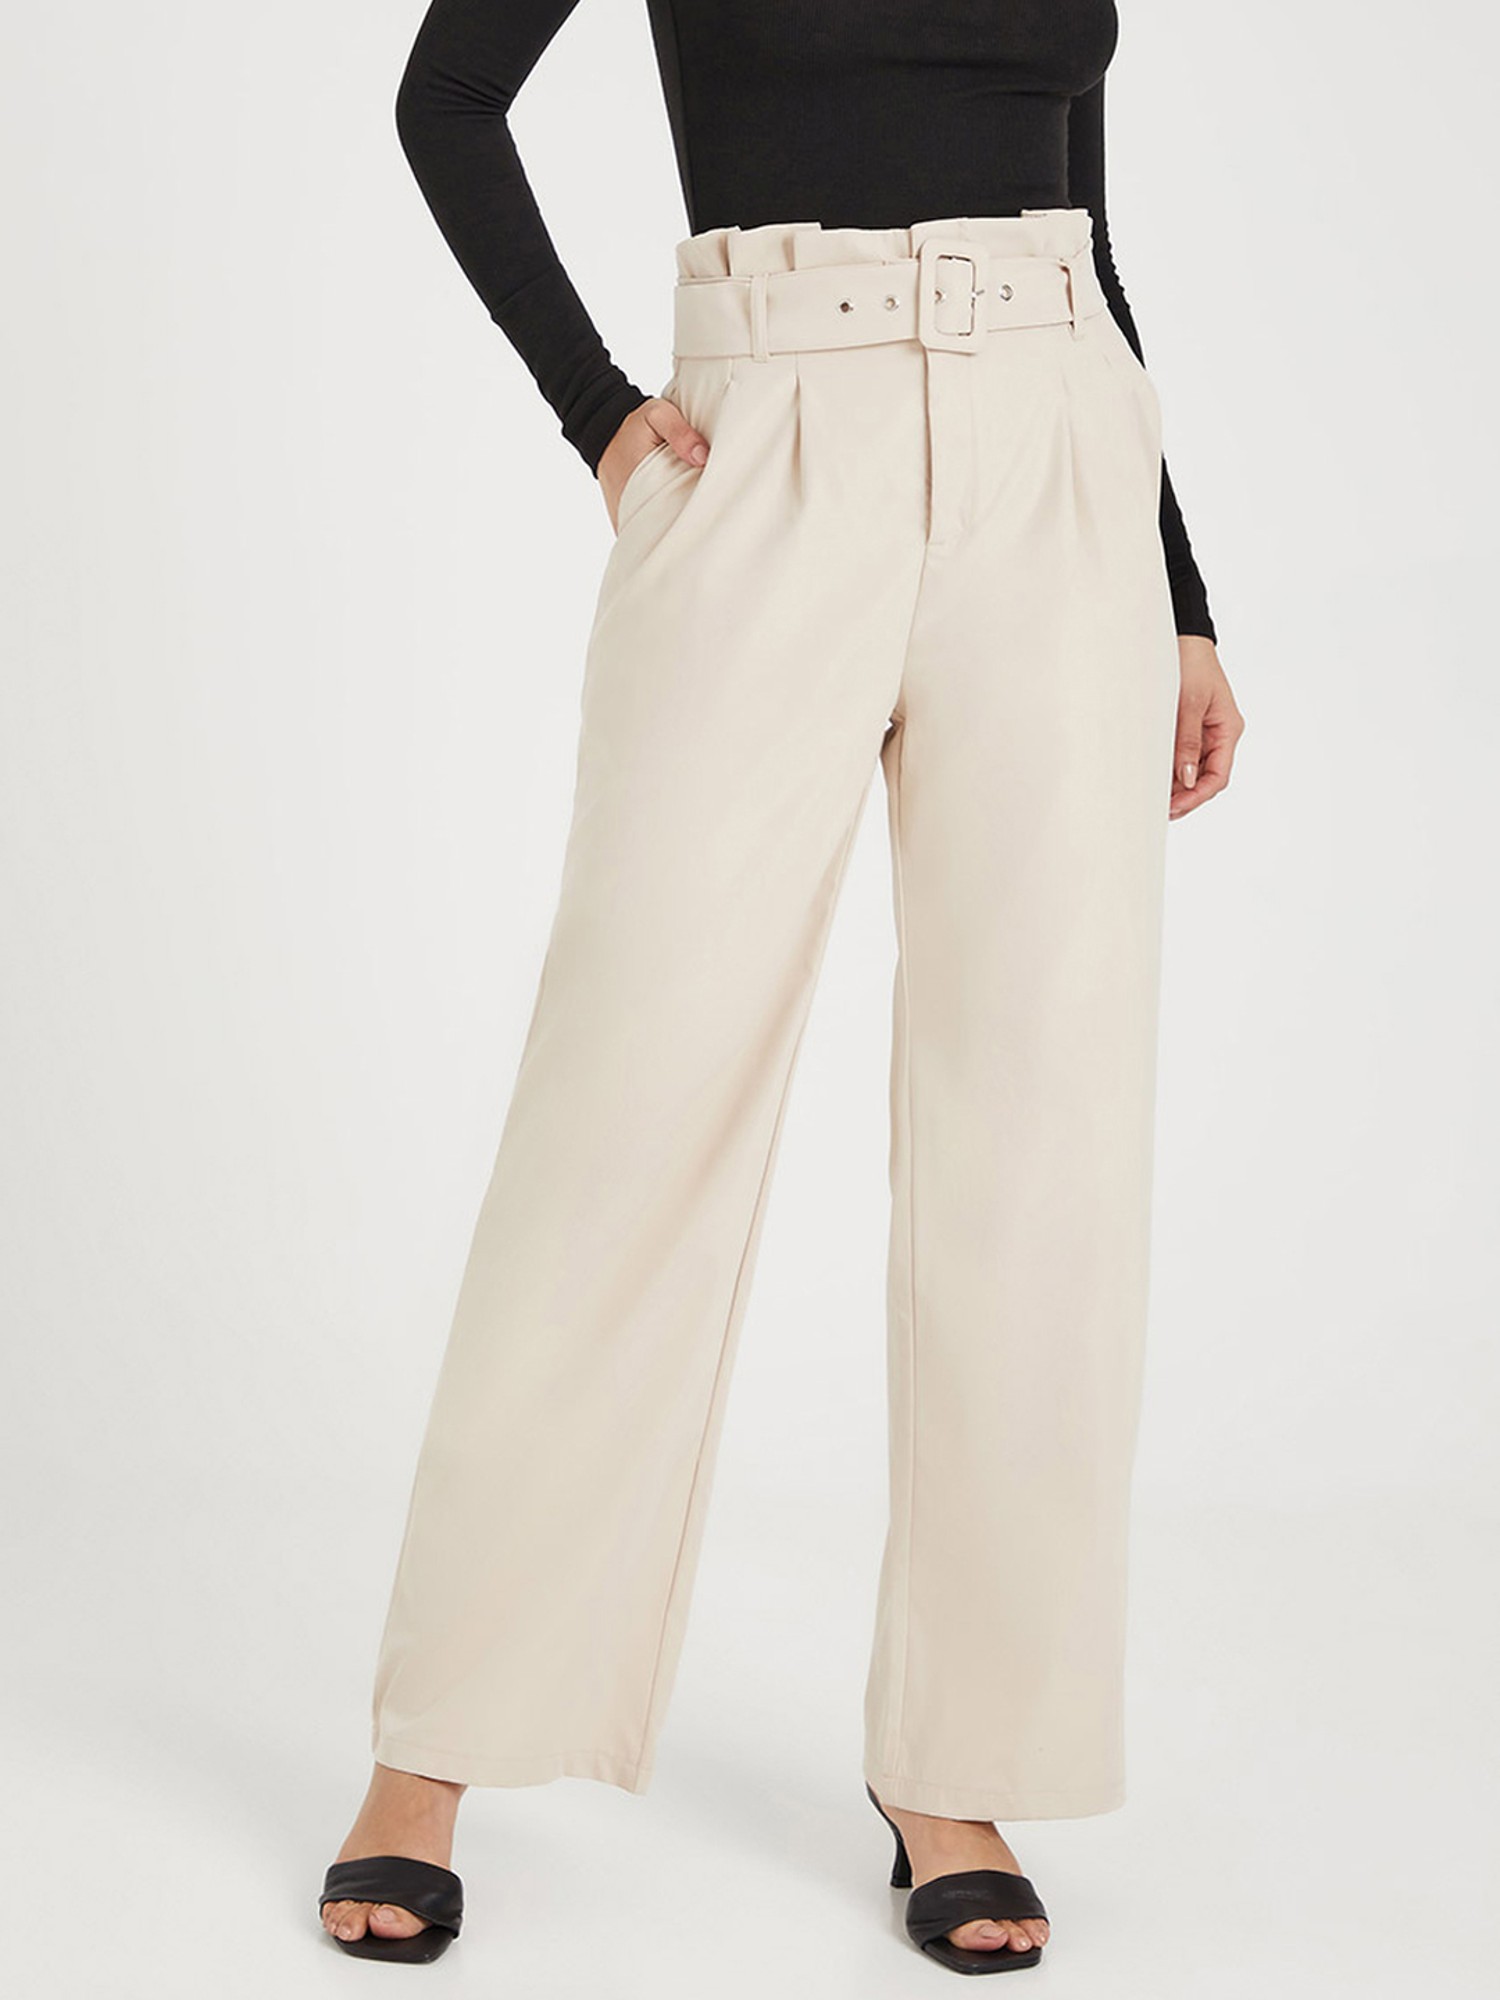 Buy Olive Green Trousers  Pants for Women by Rue Collection Online   Ajiocom